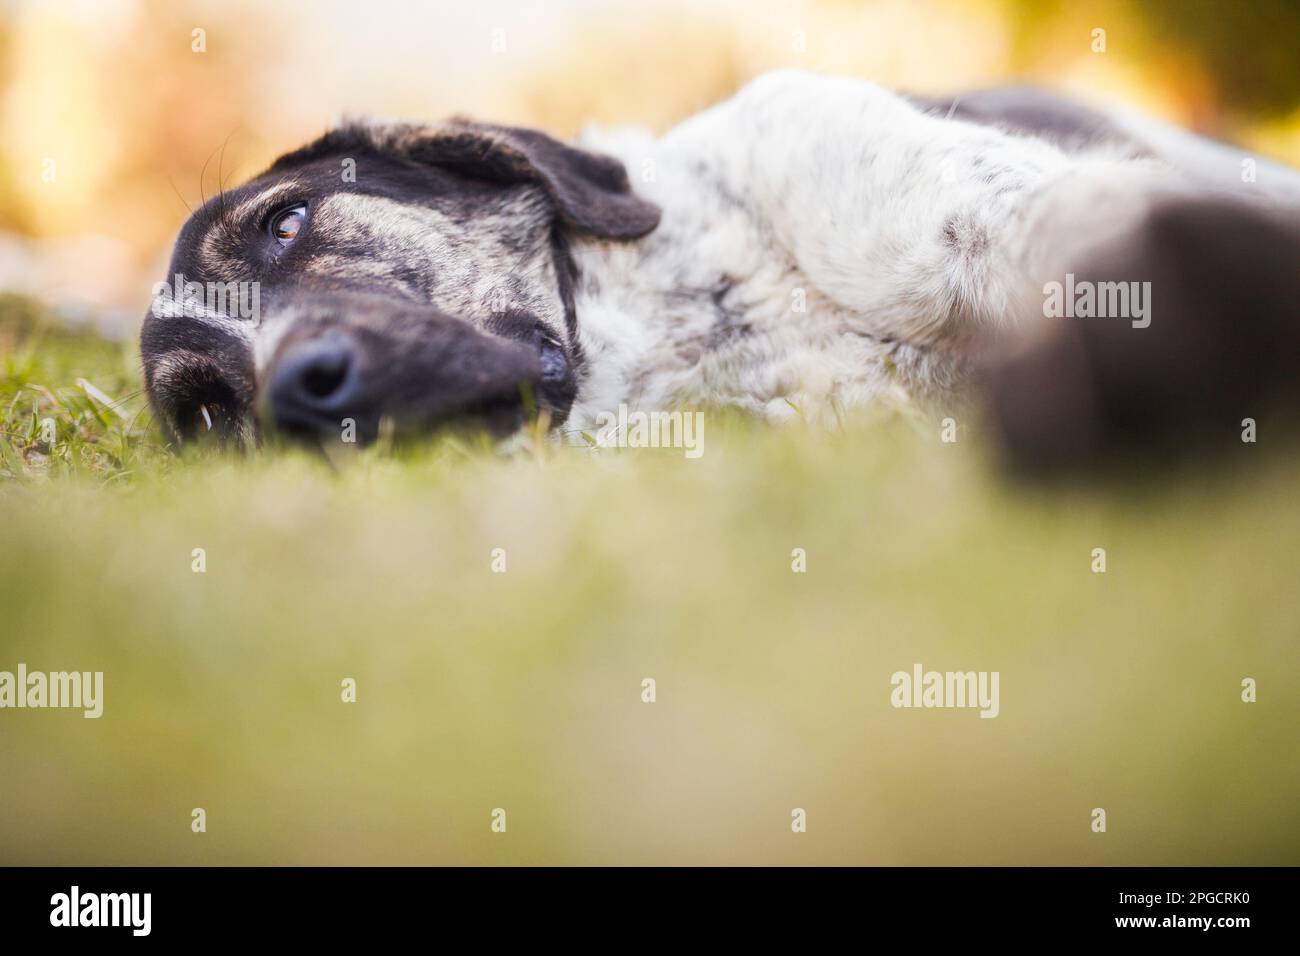 Ground level of adorable big Rafeiro do Alentejo dog resting on meadow on sunny day against blurred background Stock Photo